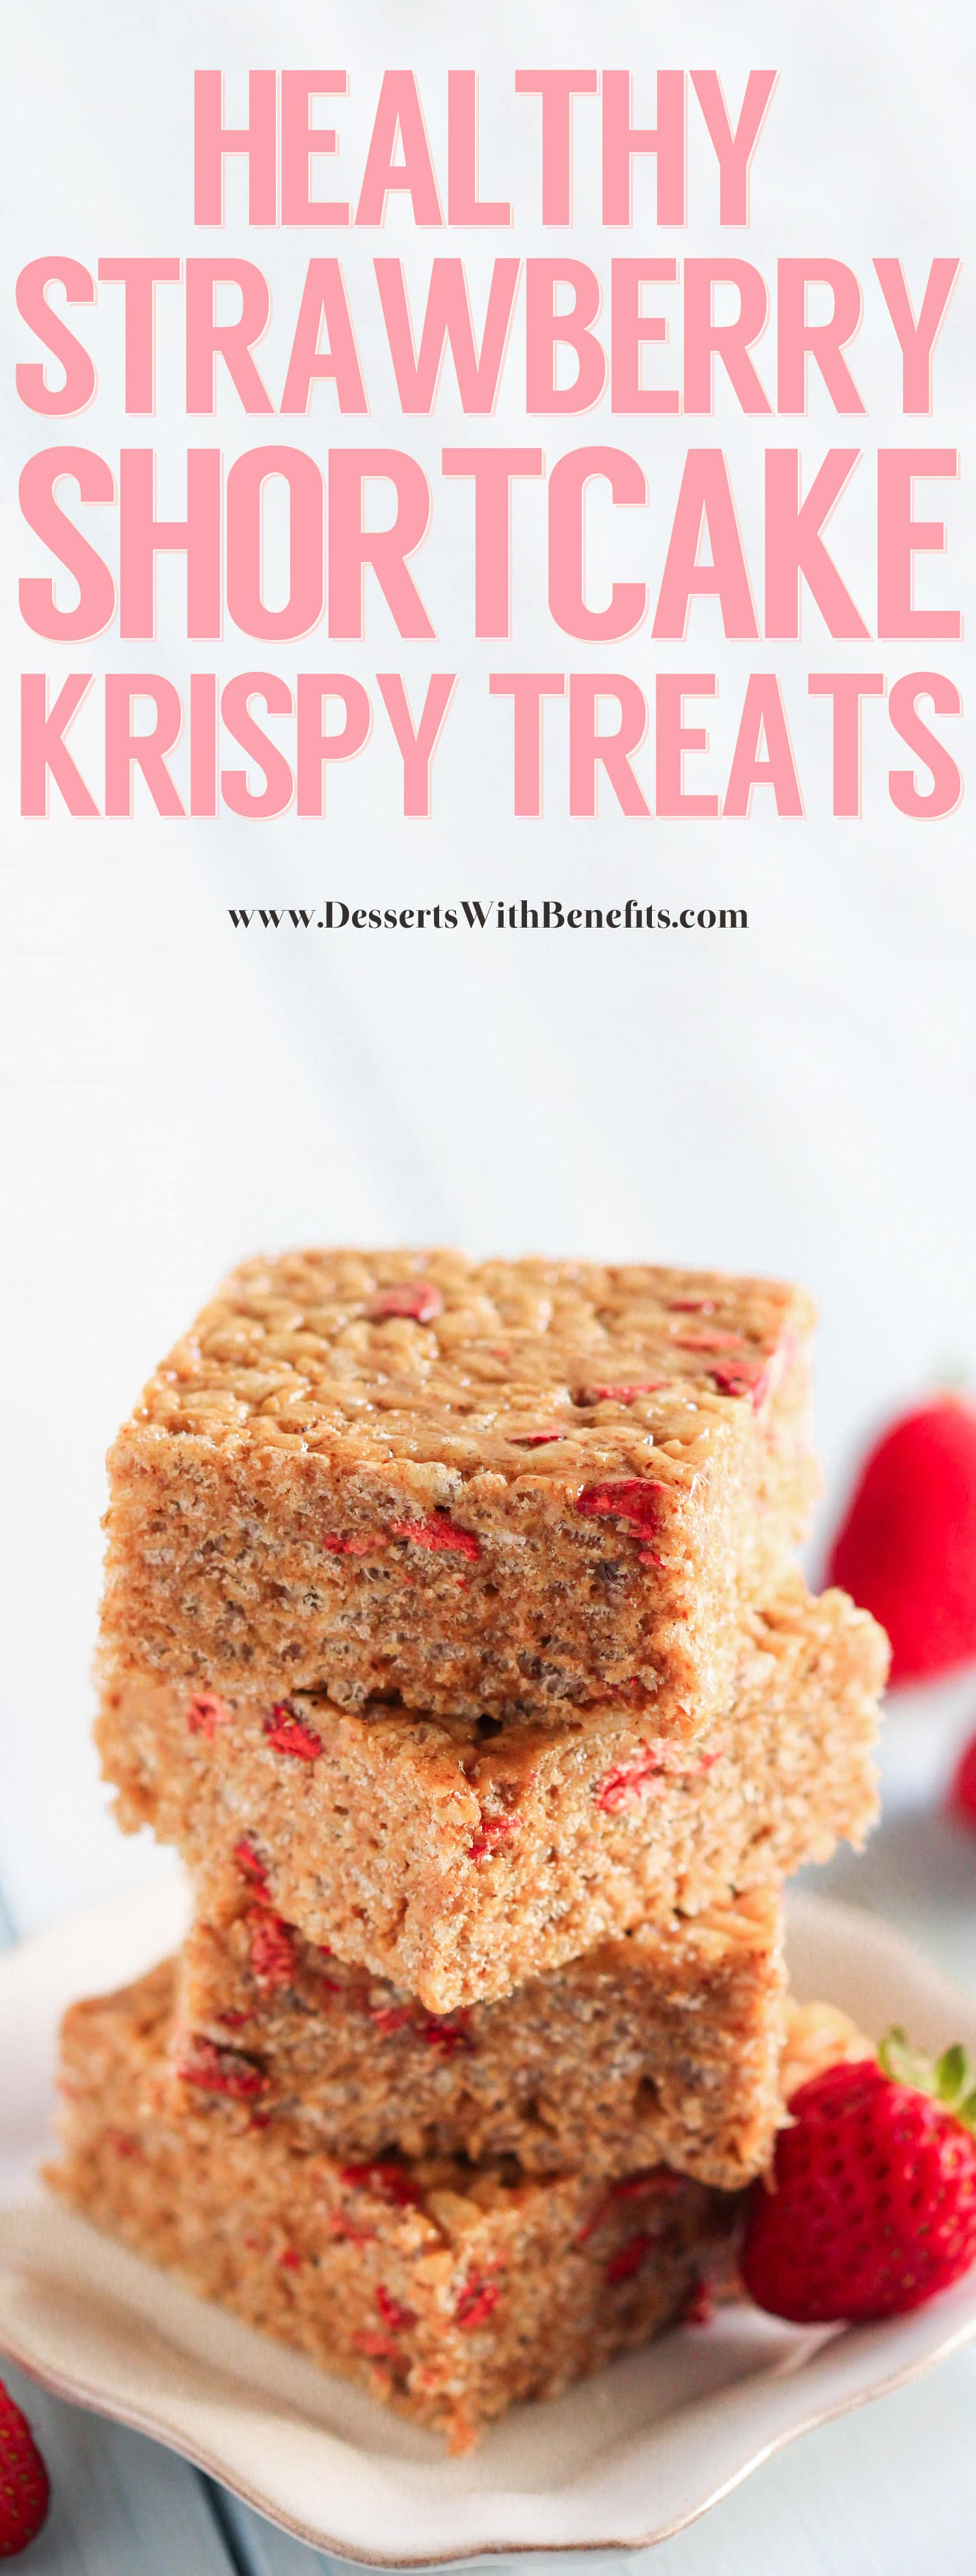 Healthy Strawberry Shortcake Krispy Treats (refined sugar free, high protein, and gluten free, with a vegan option)!